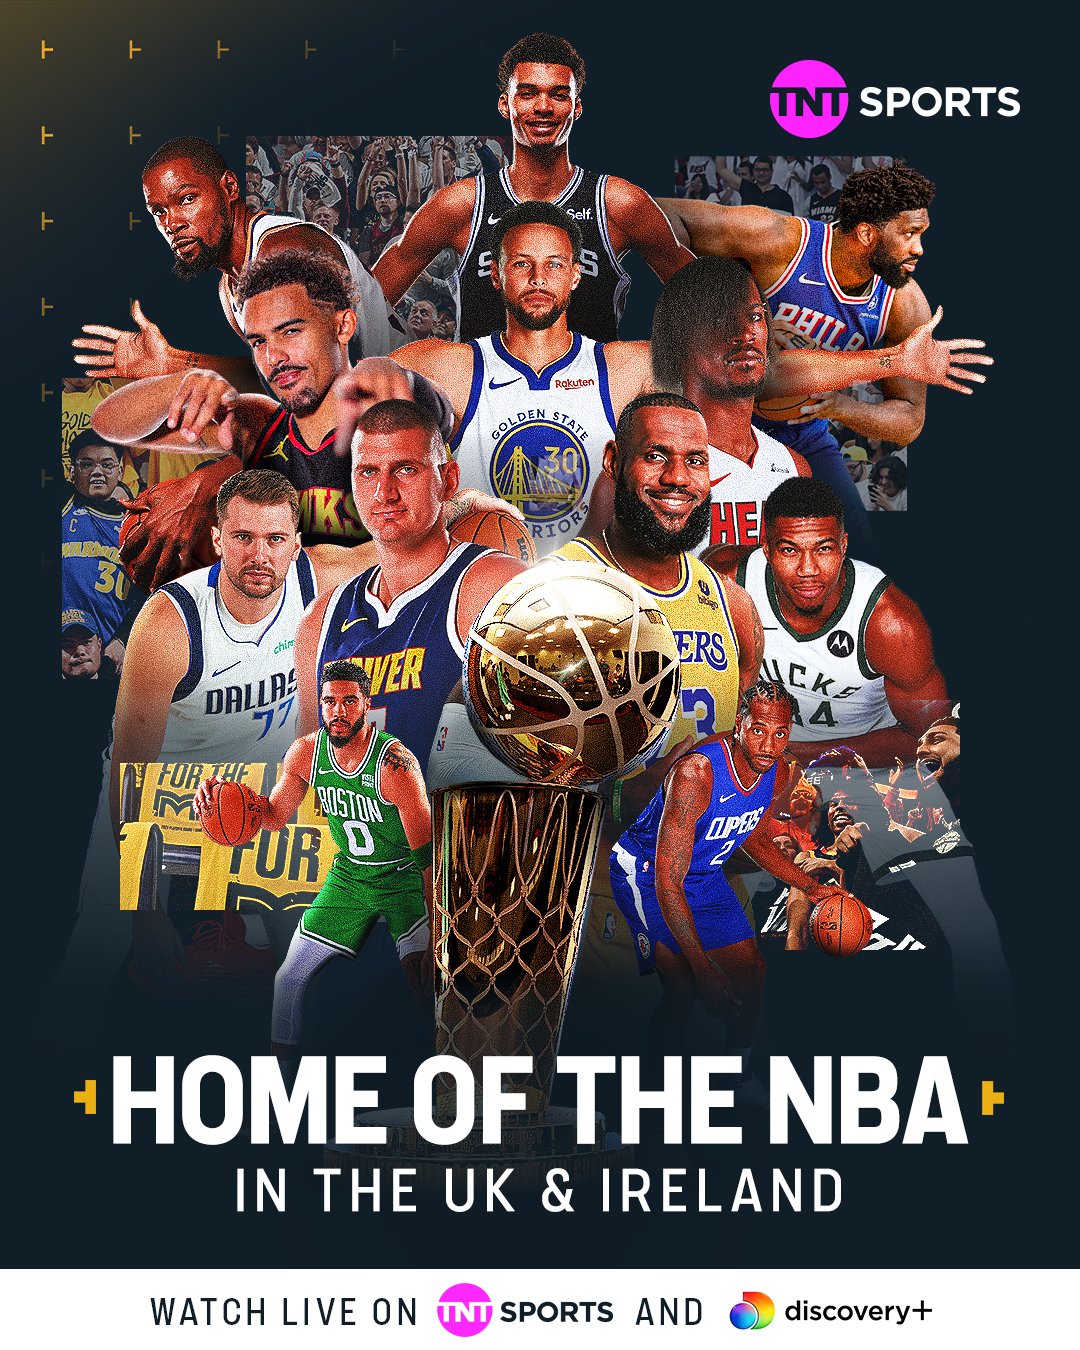 TV Rights – The NBA comes to TNT Sports in the UK